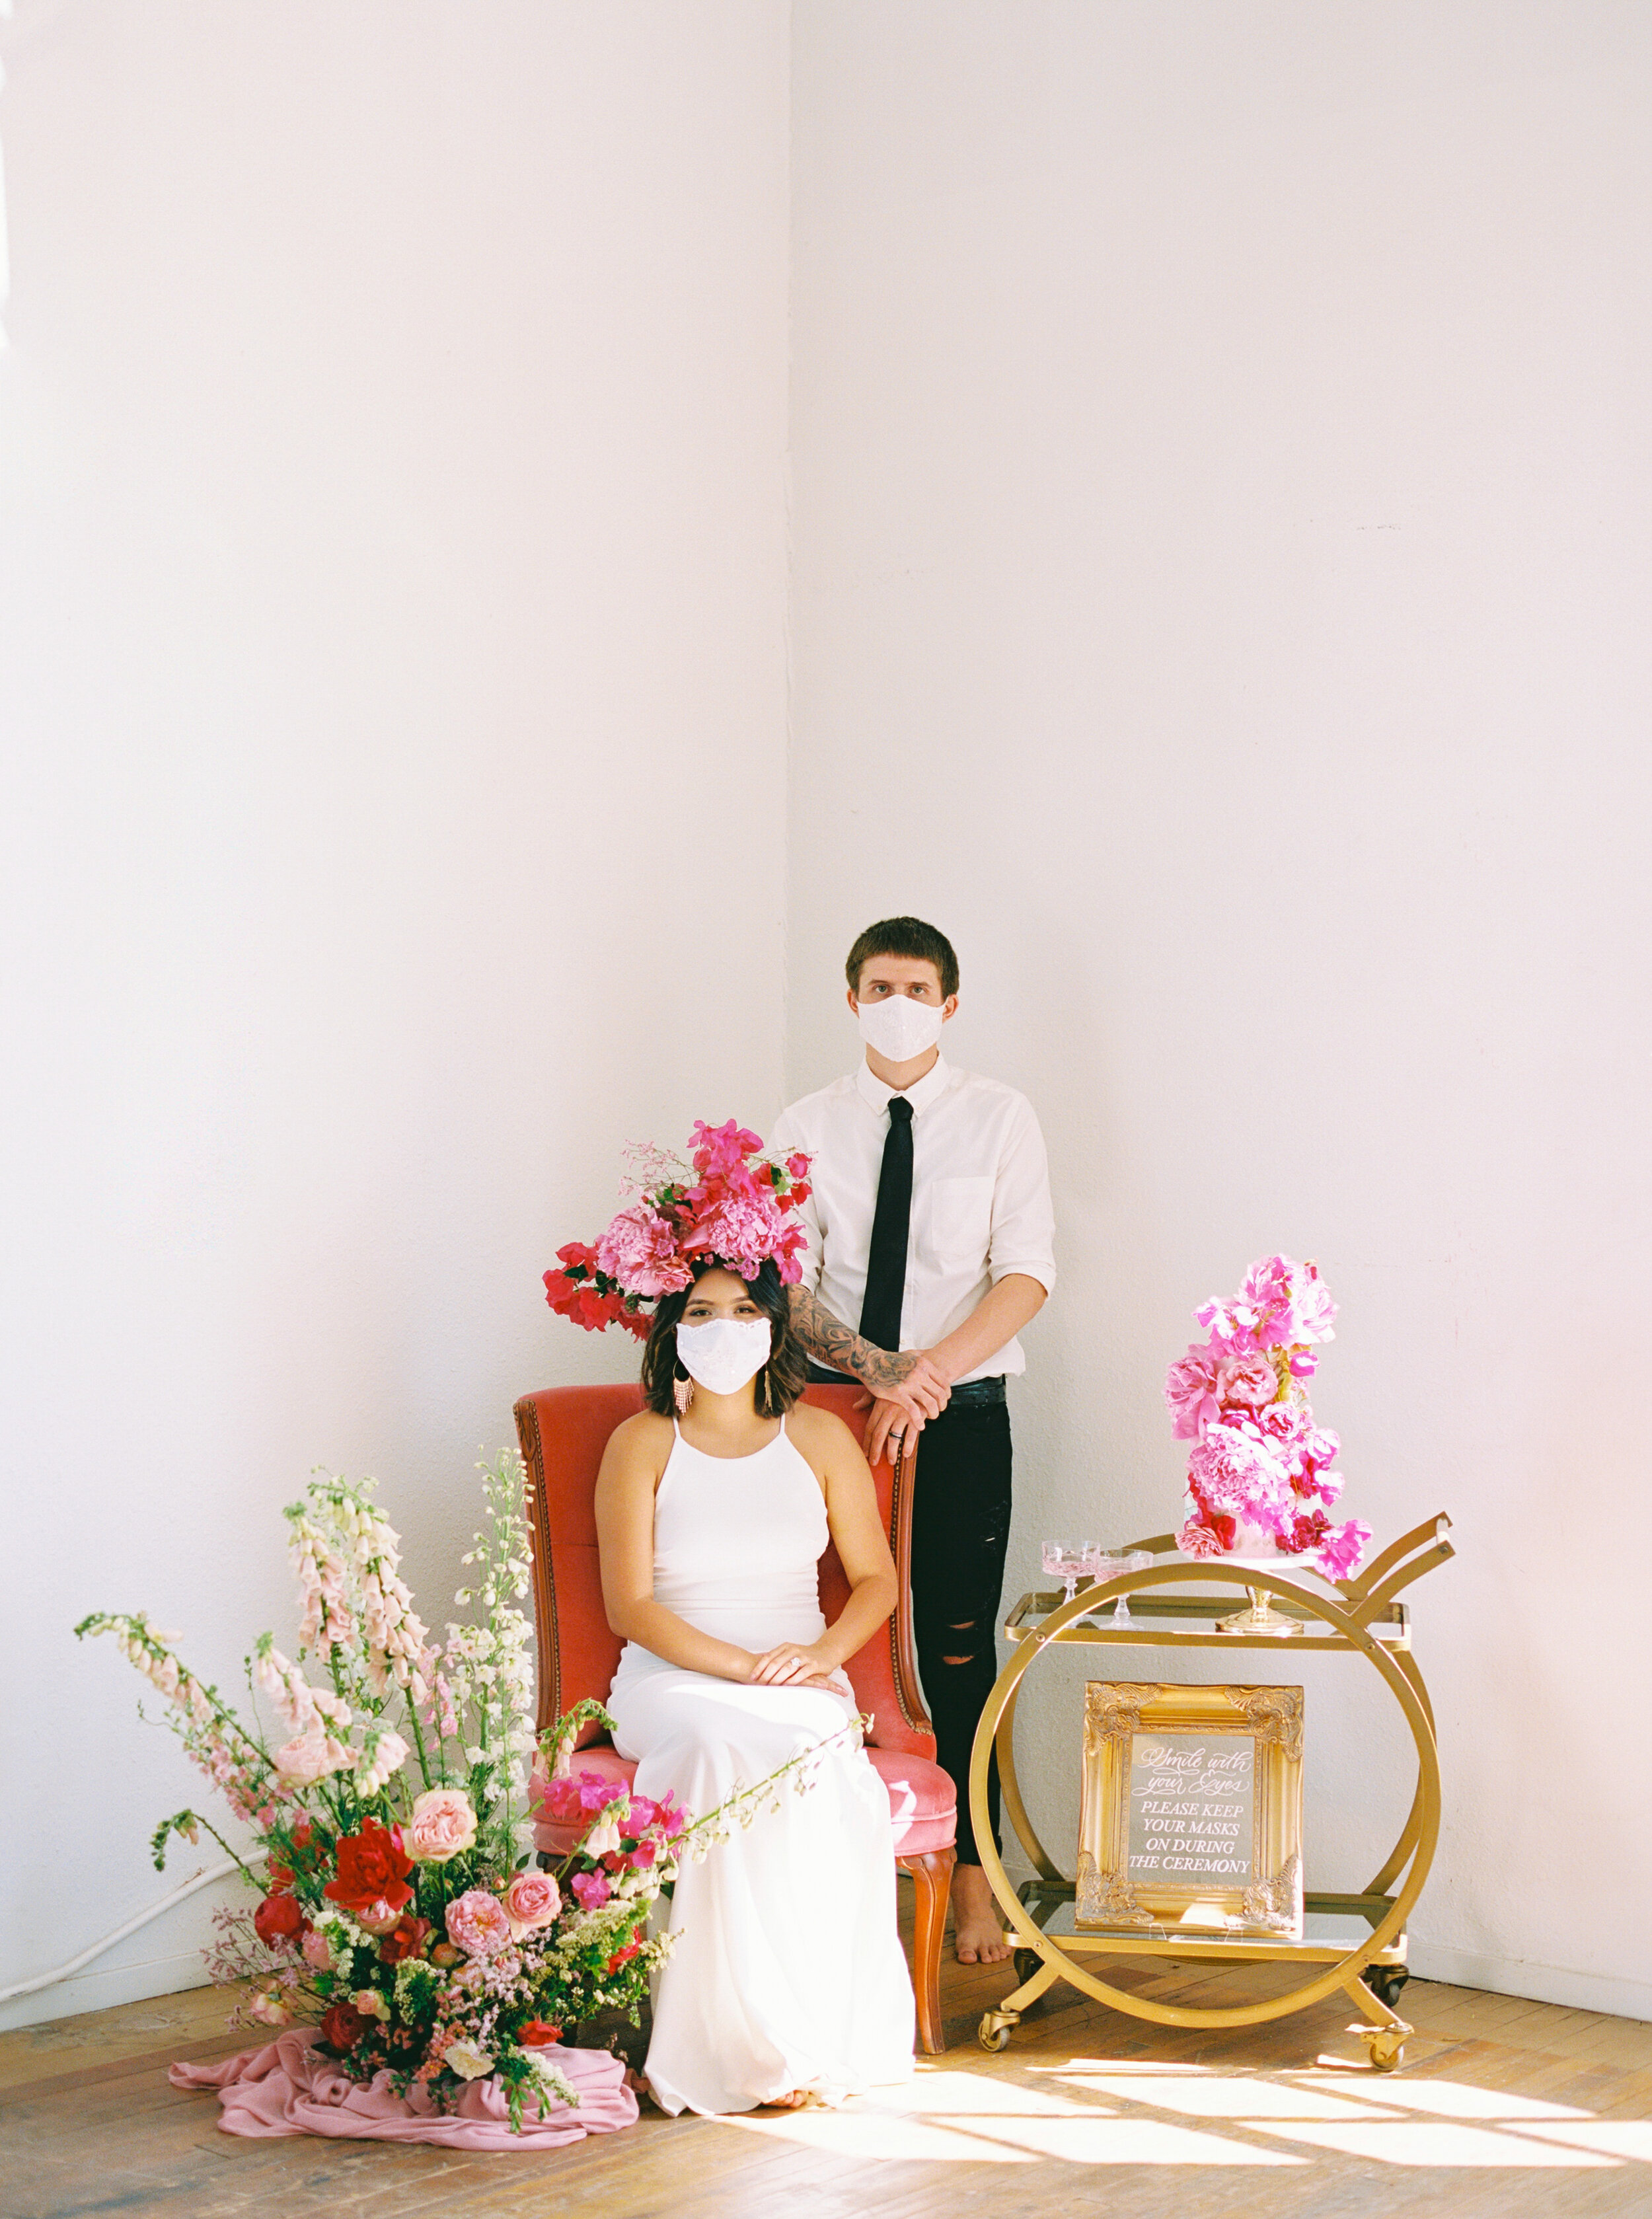 A Romantic Wedding Elopement Filled with Colorful Fuchsia - Sarahi Hadden Submission-6.jpg